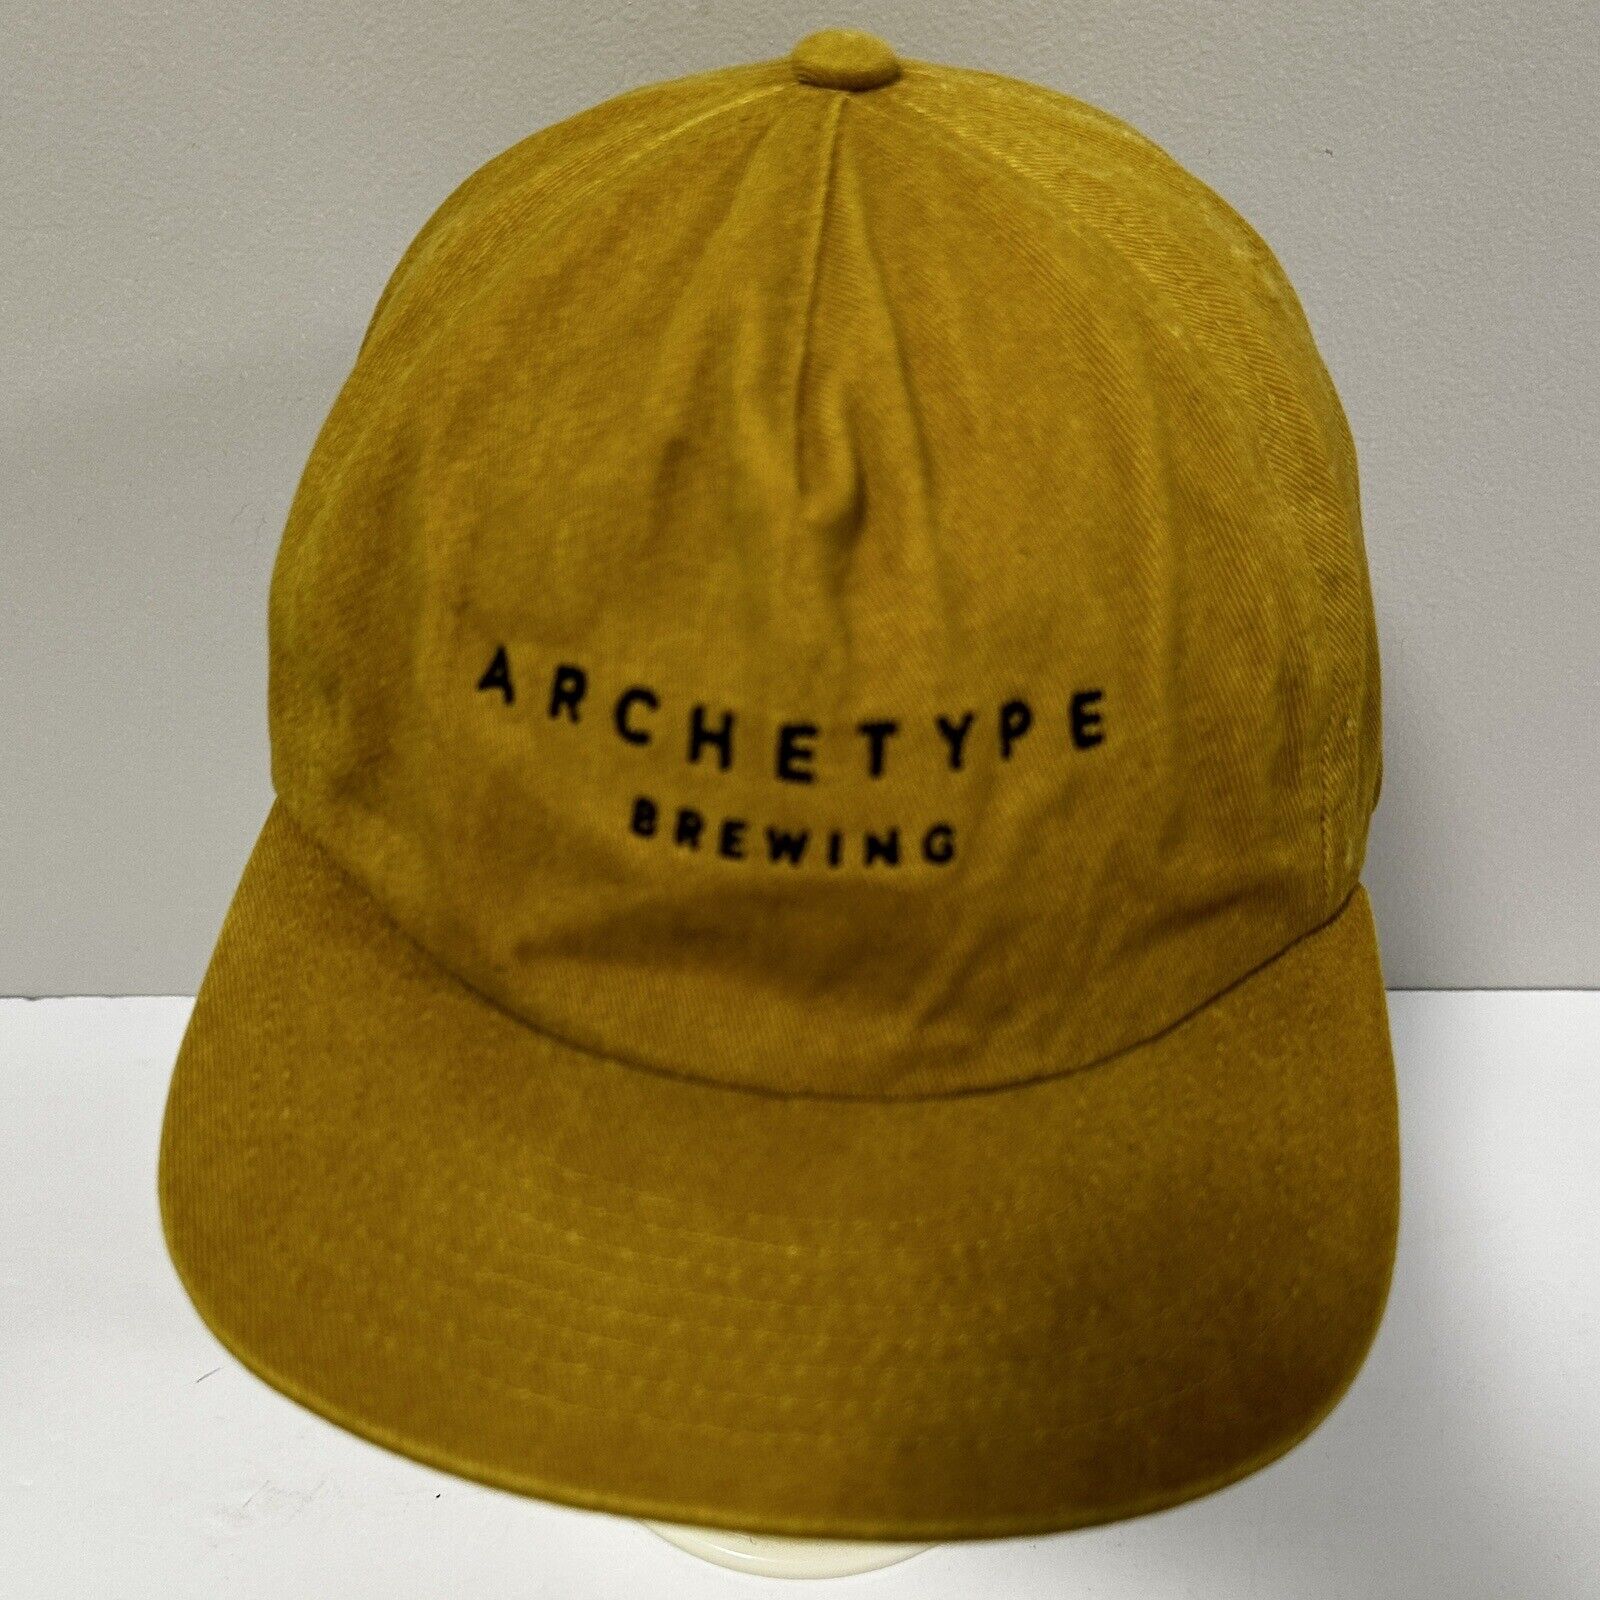 ARCHETYPE BREWING Asheville NC Brewery Adjustable Dad Hat Beer Baseball Cap